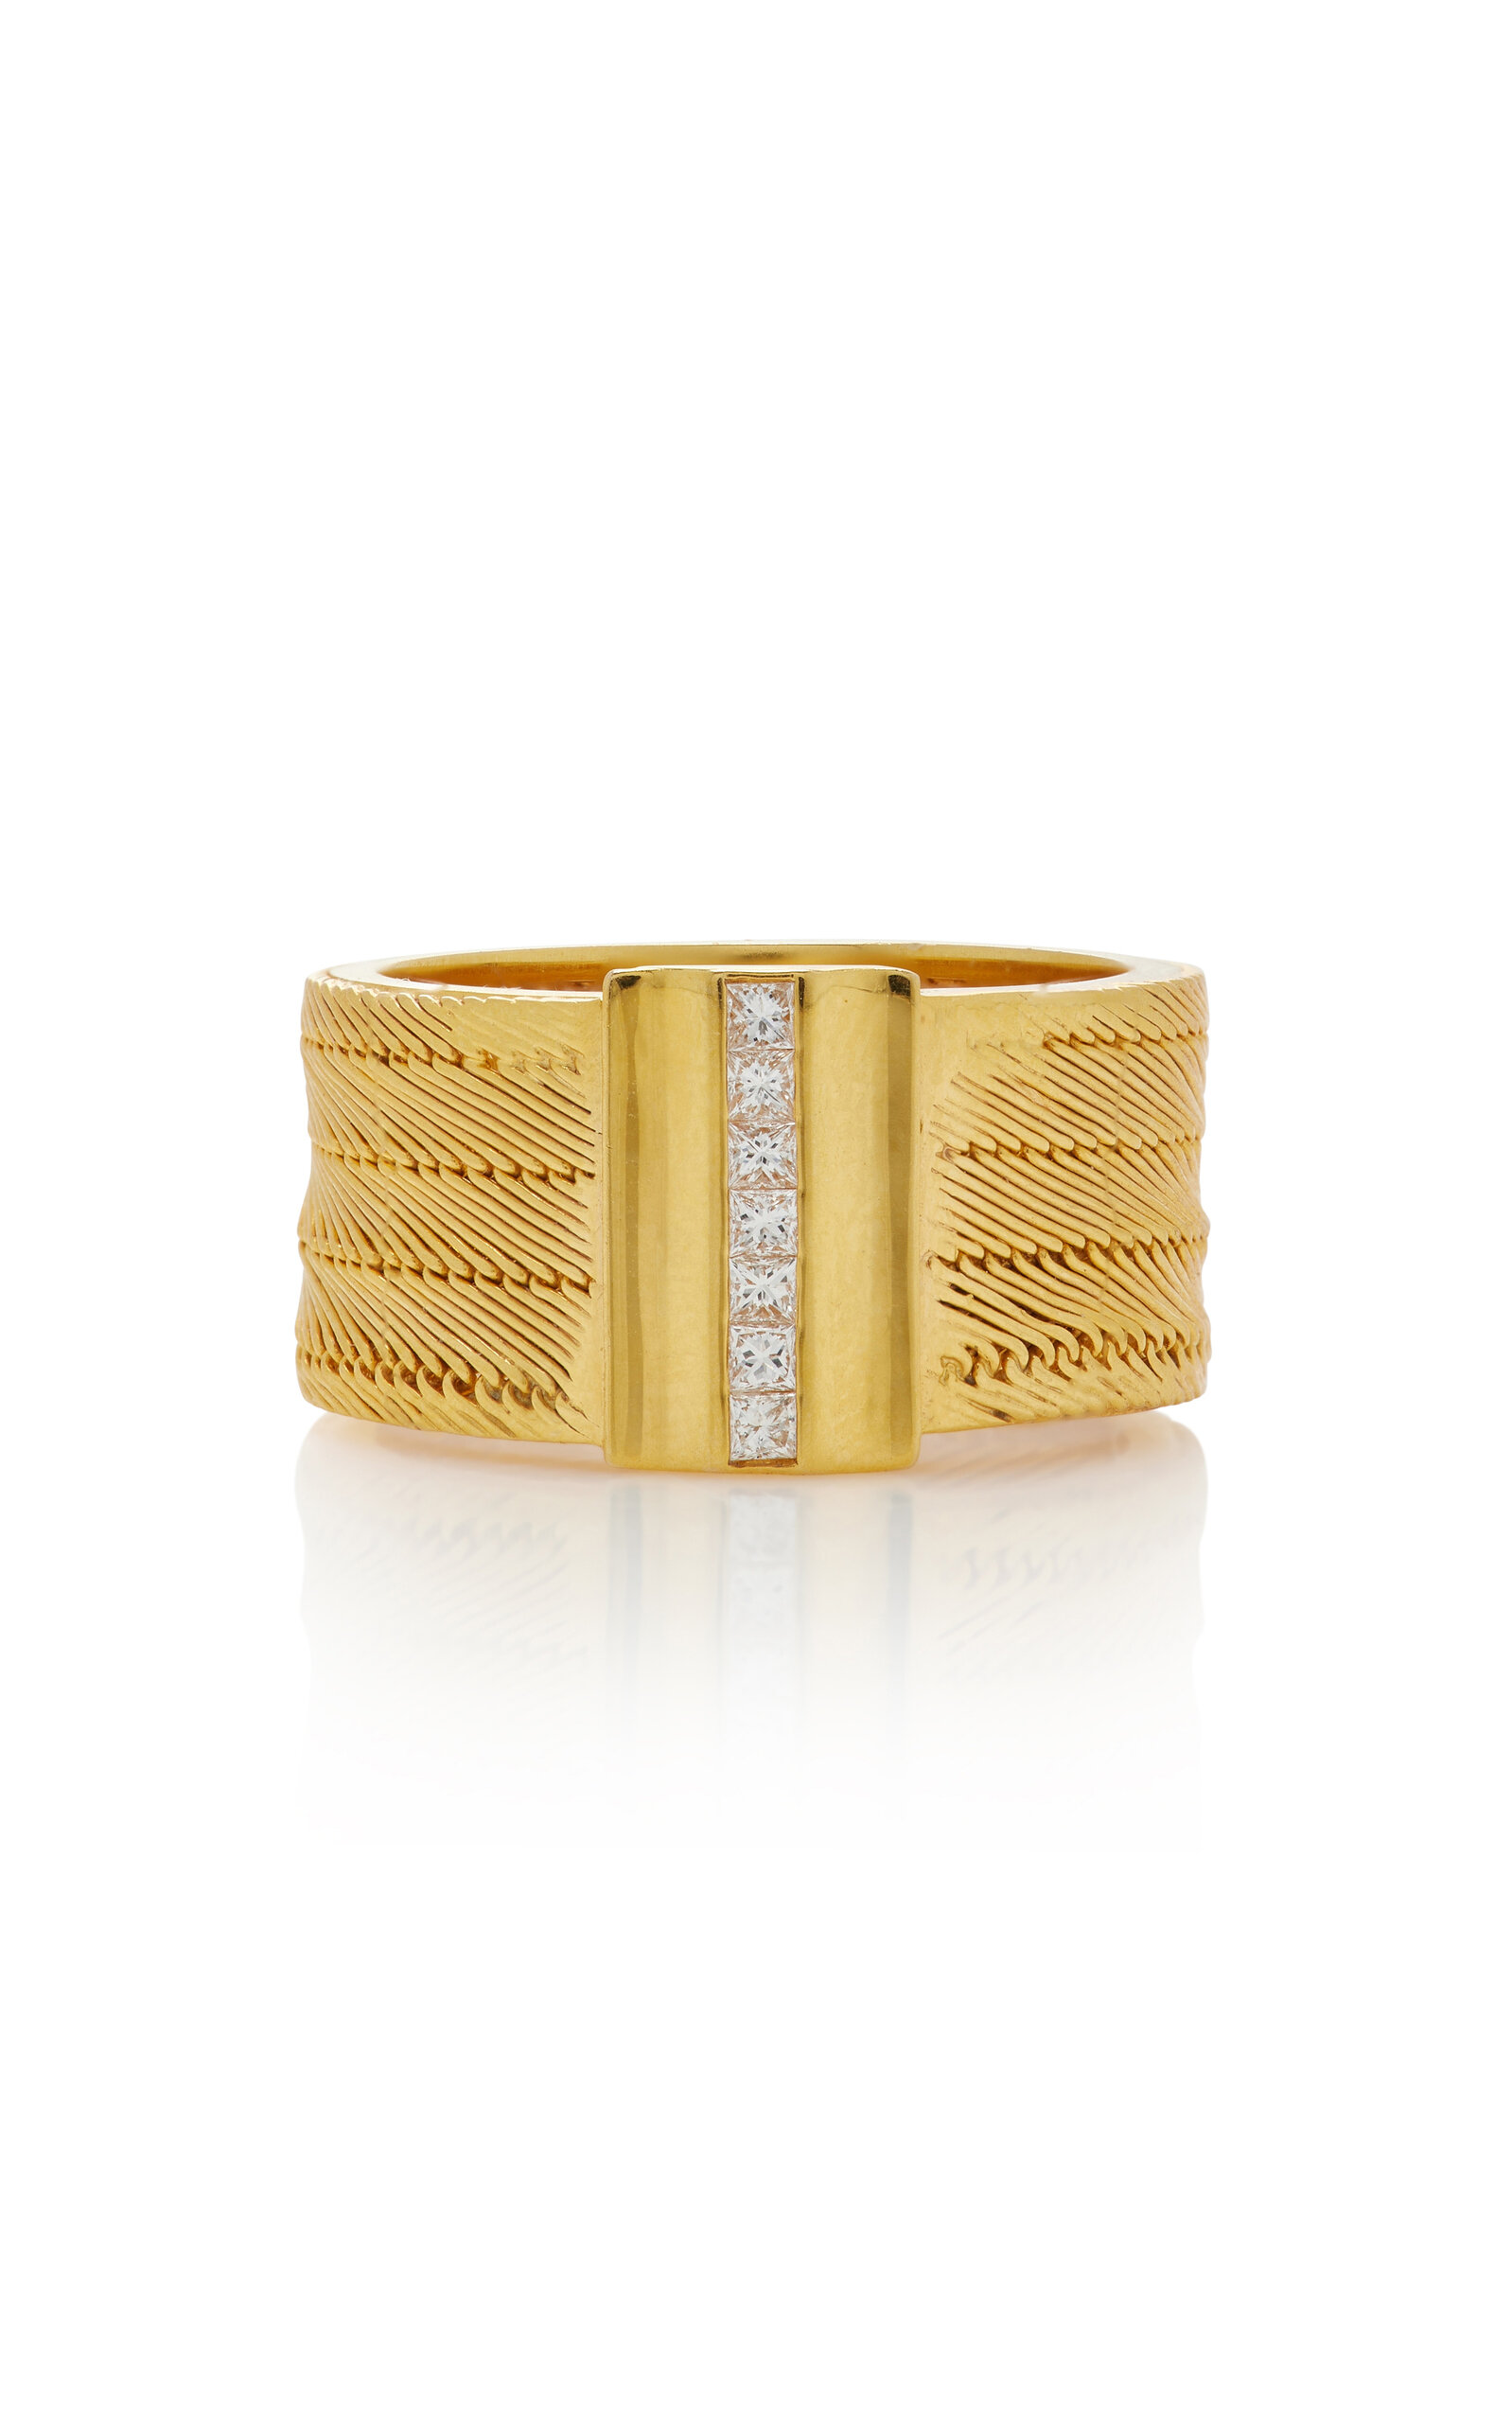 Her Story Five Line 14k Yellow Gold Diamond Ring